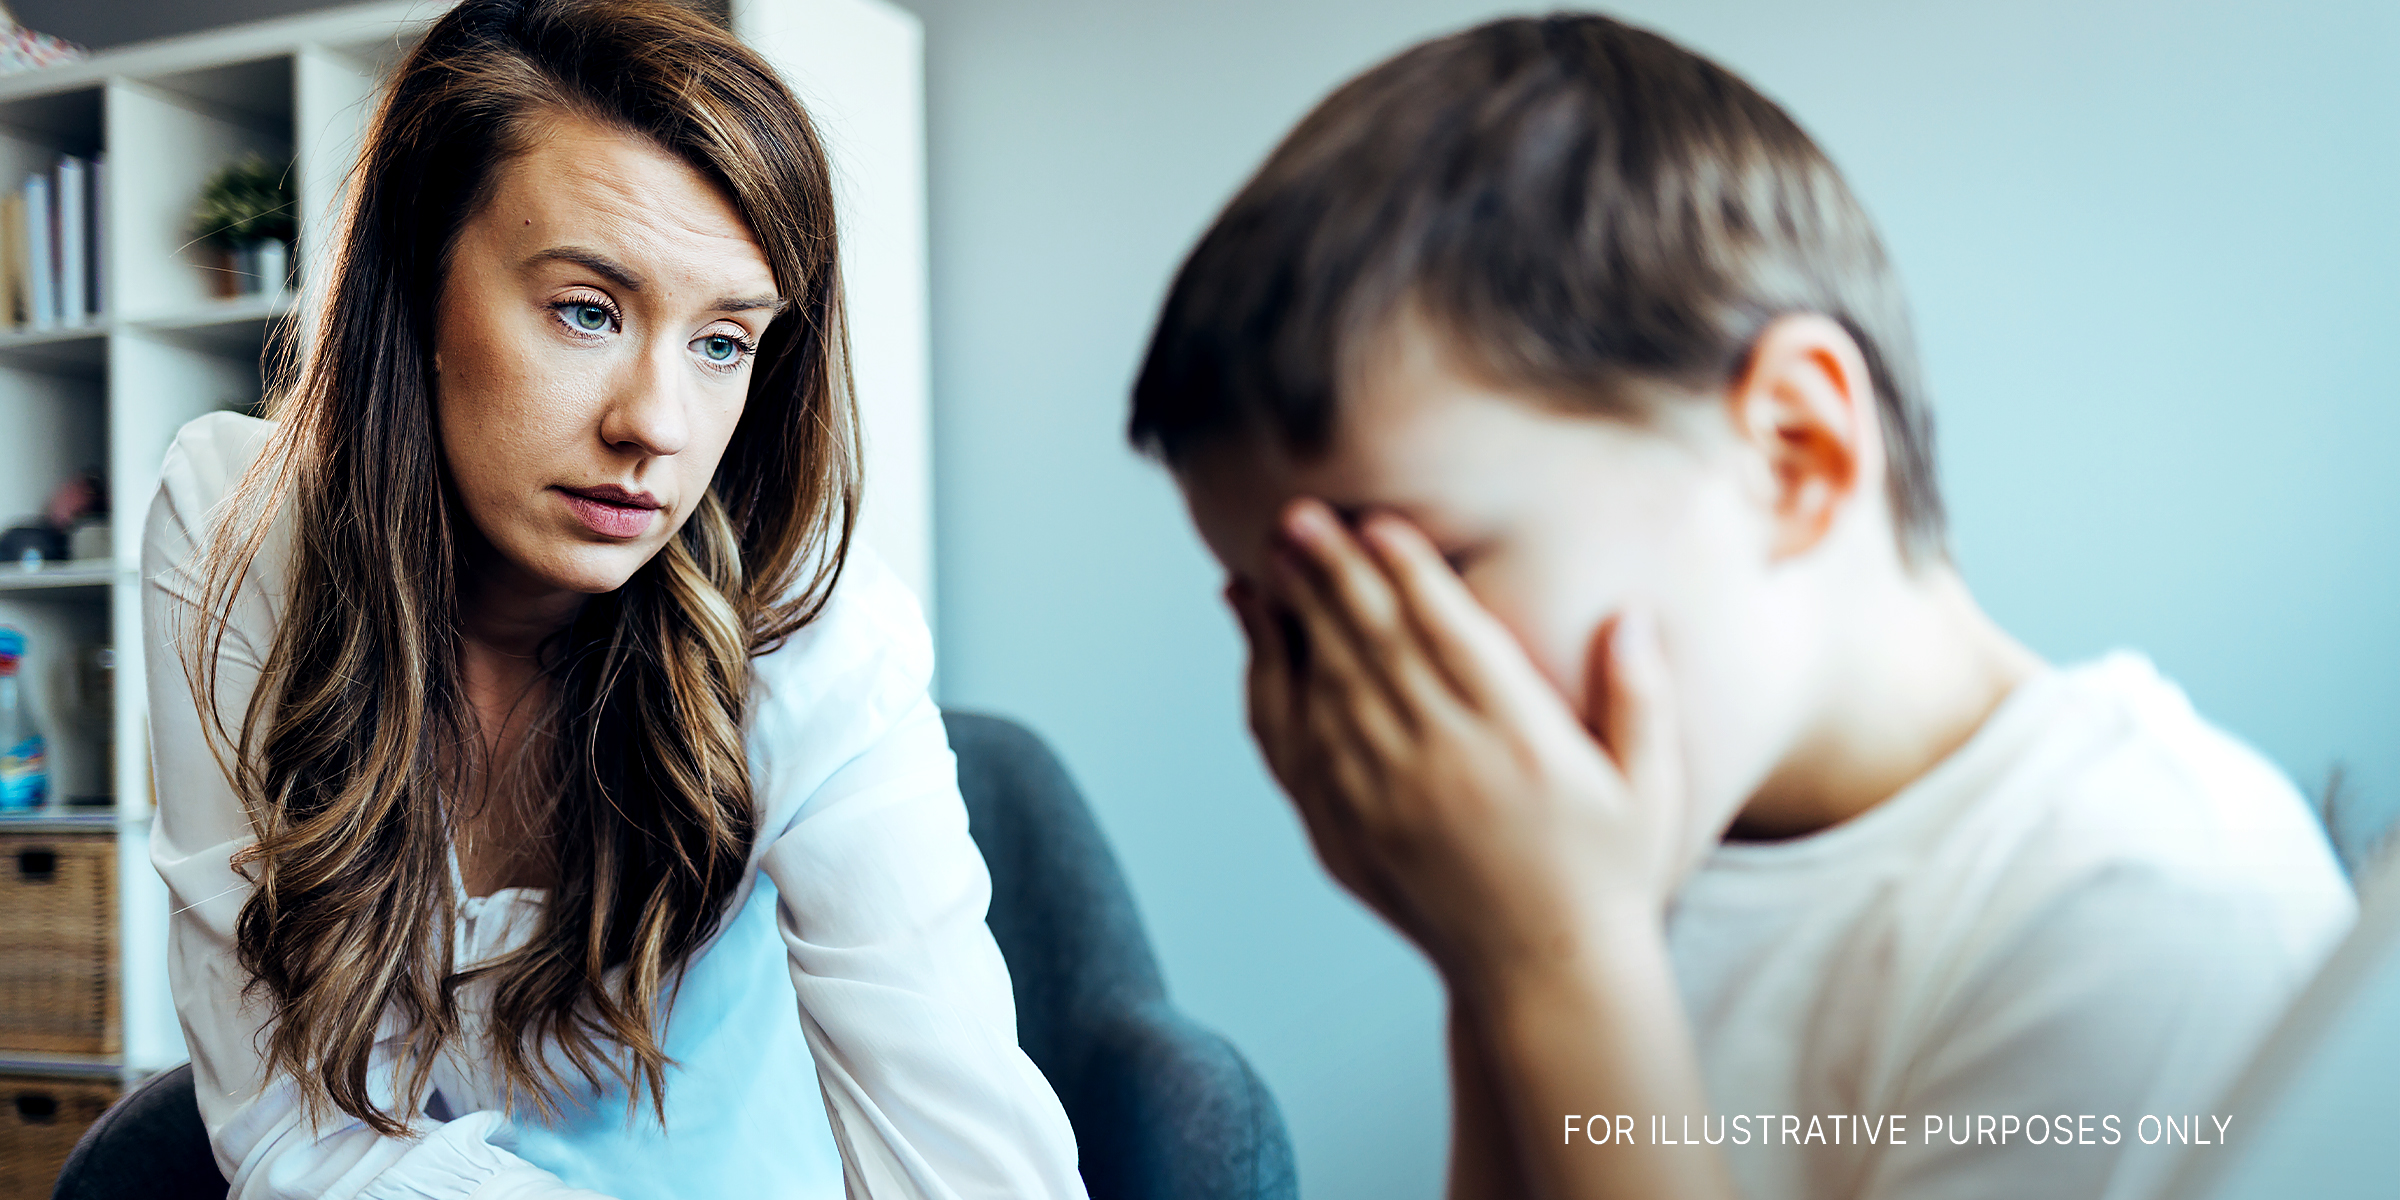 Mom confronting her son | Source: Shutterstock